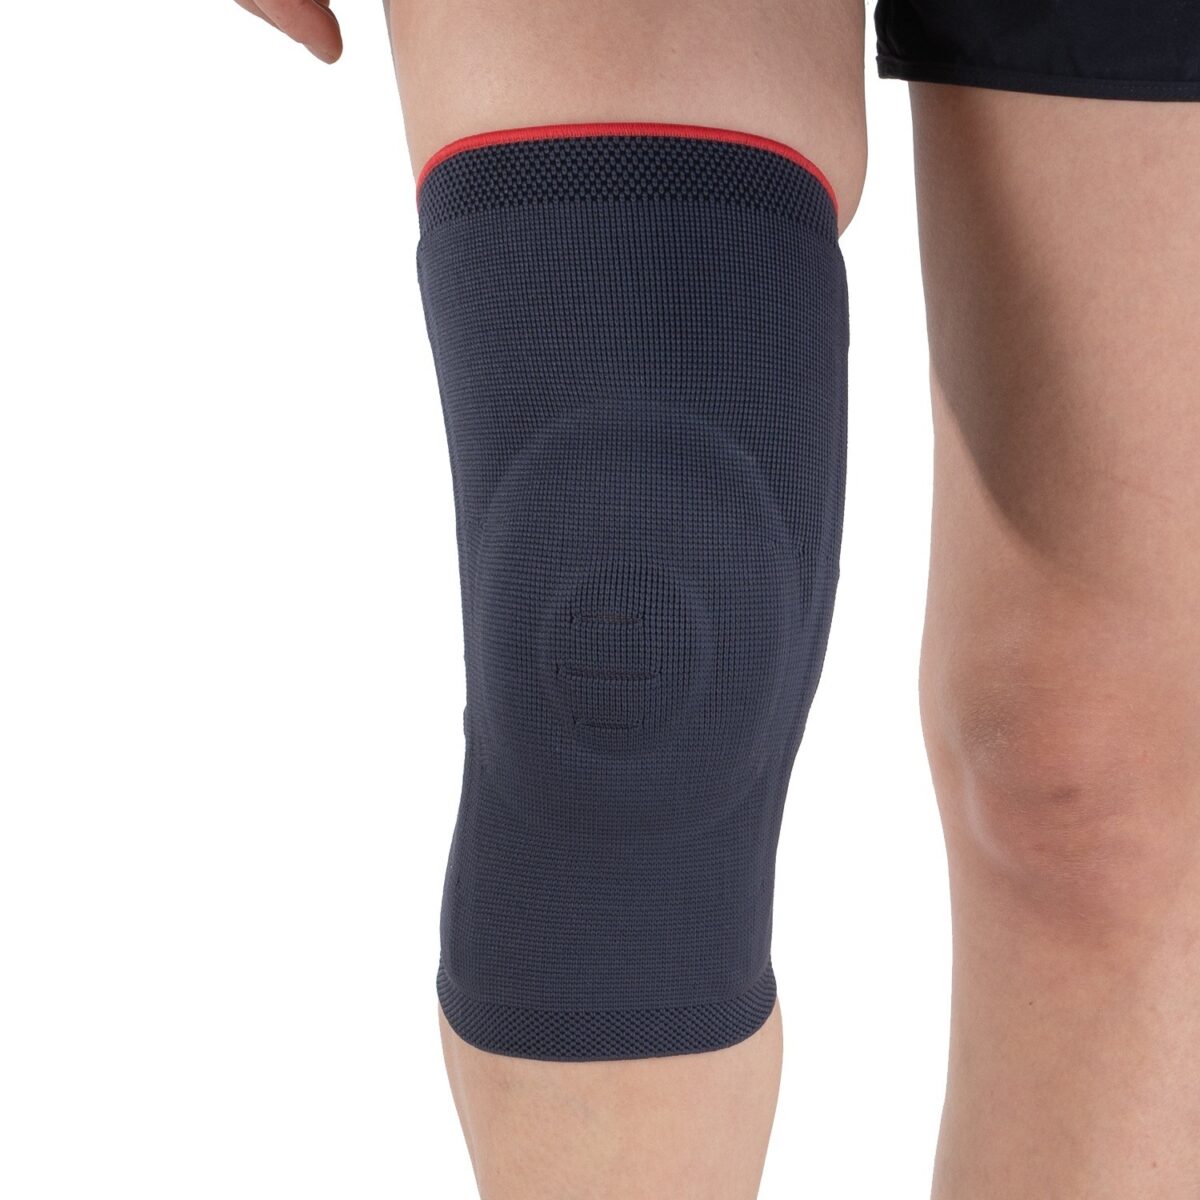 wingmed orthopedic equipments W506 woven patella and ligament knee support 65